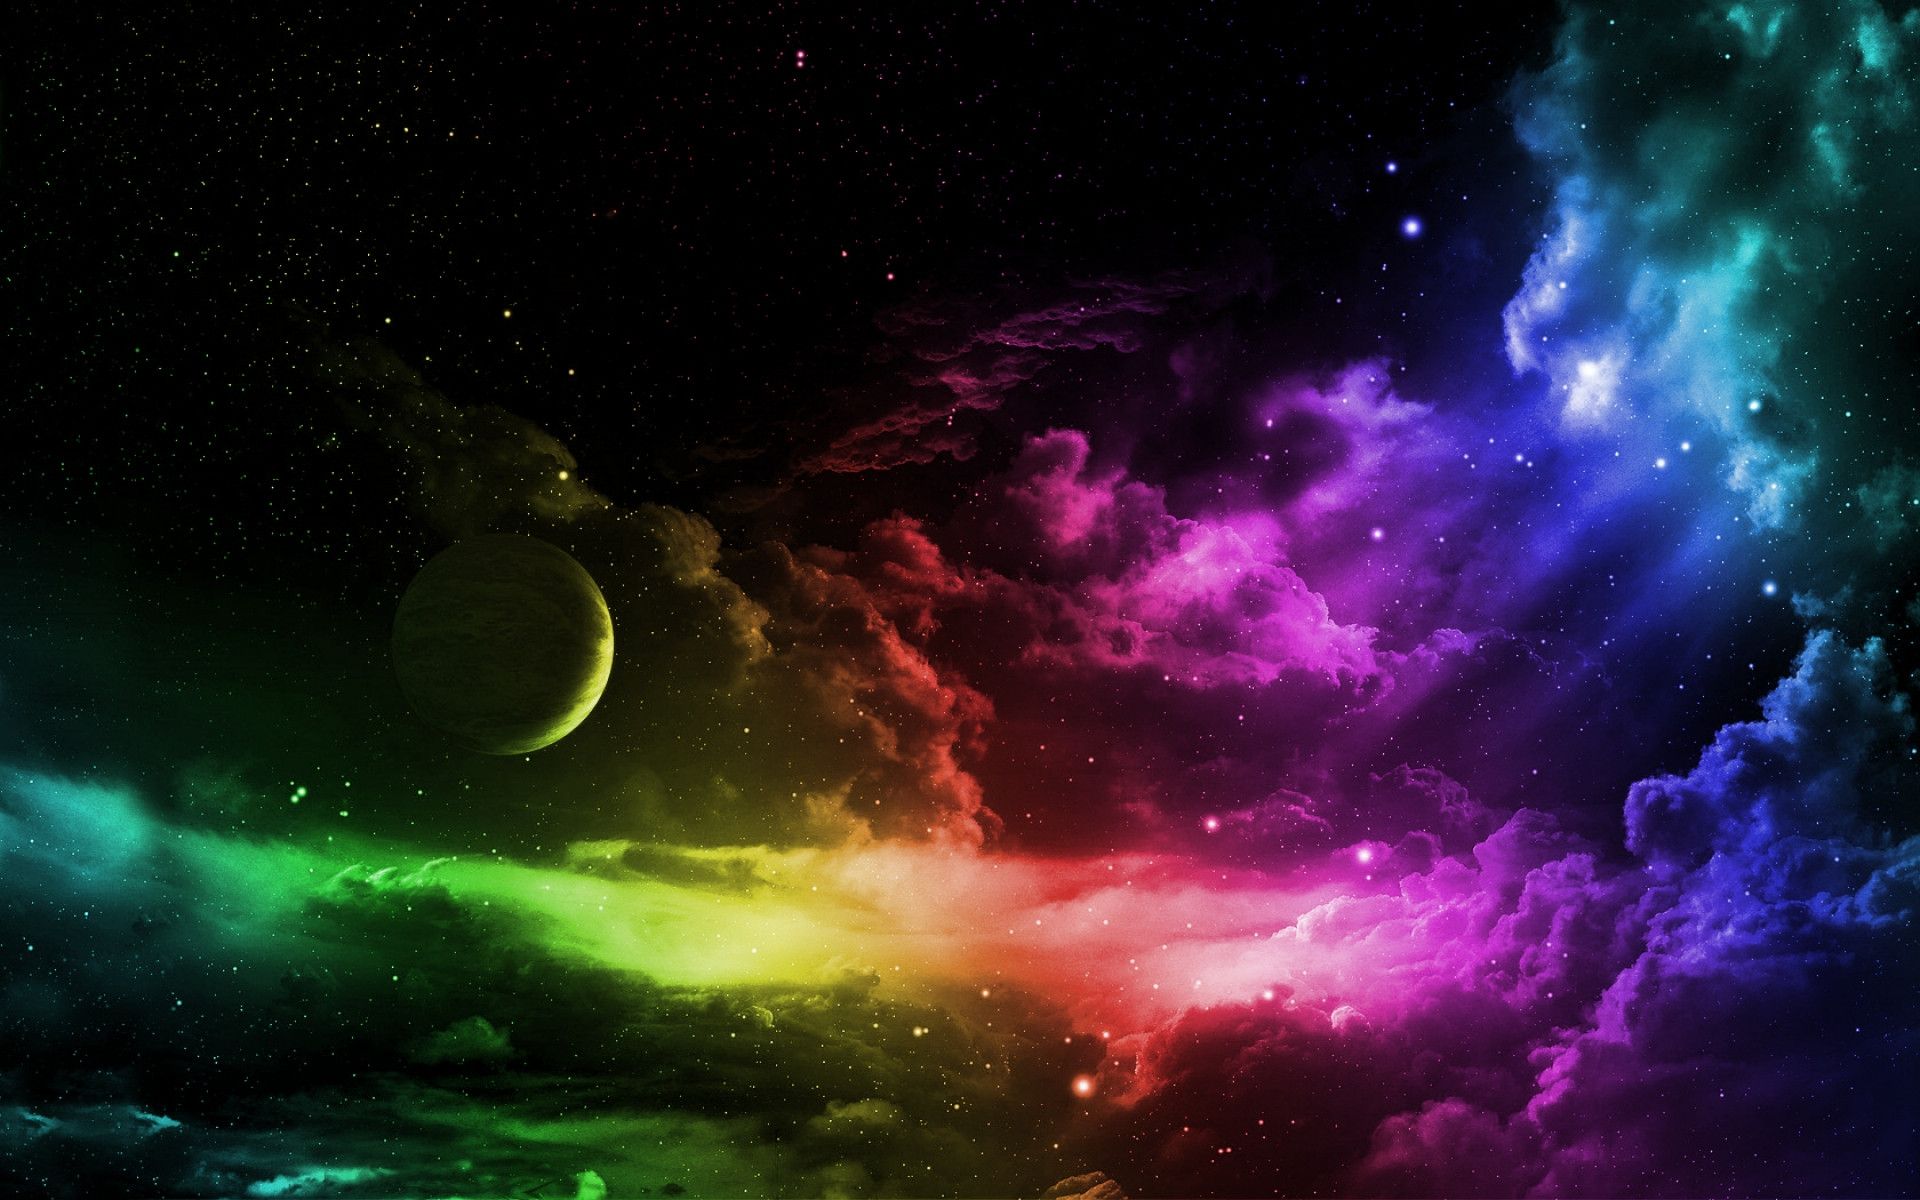 Trippy Space Wallpapers